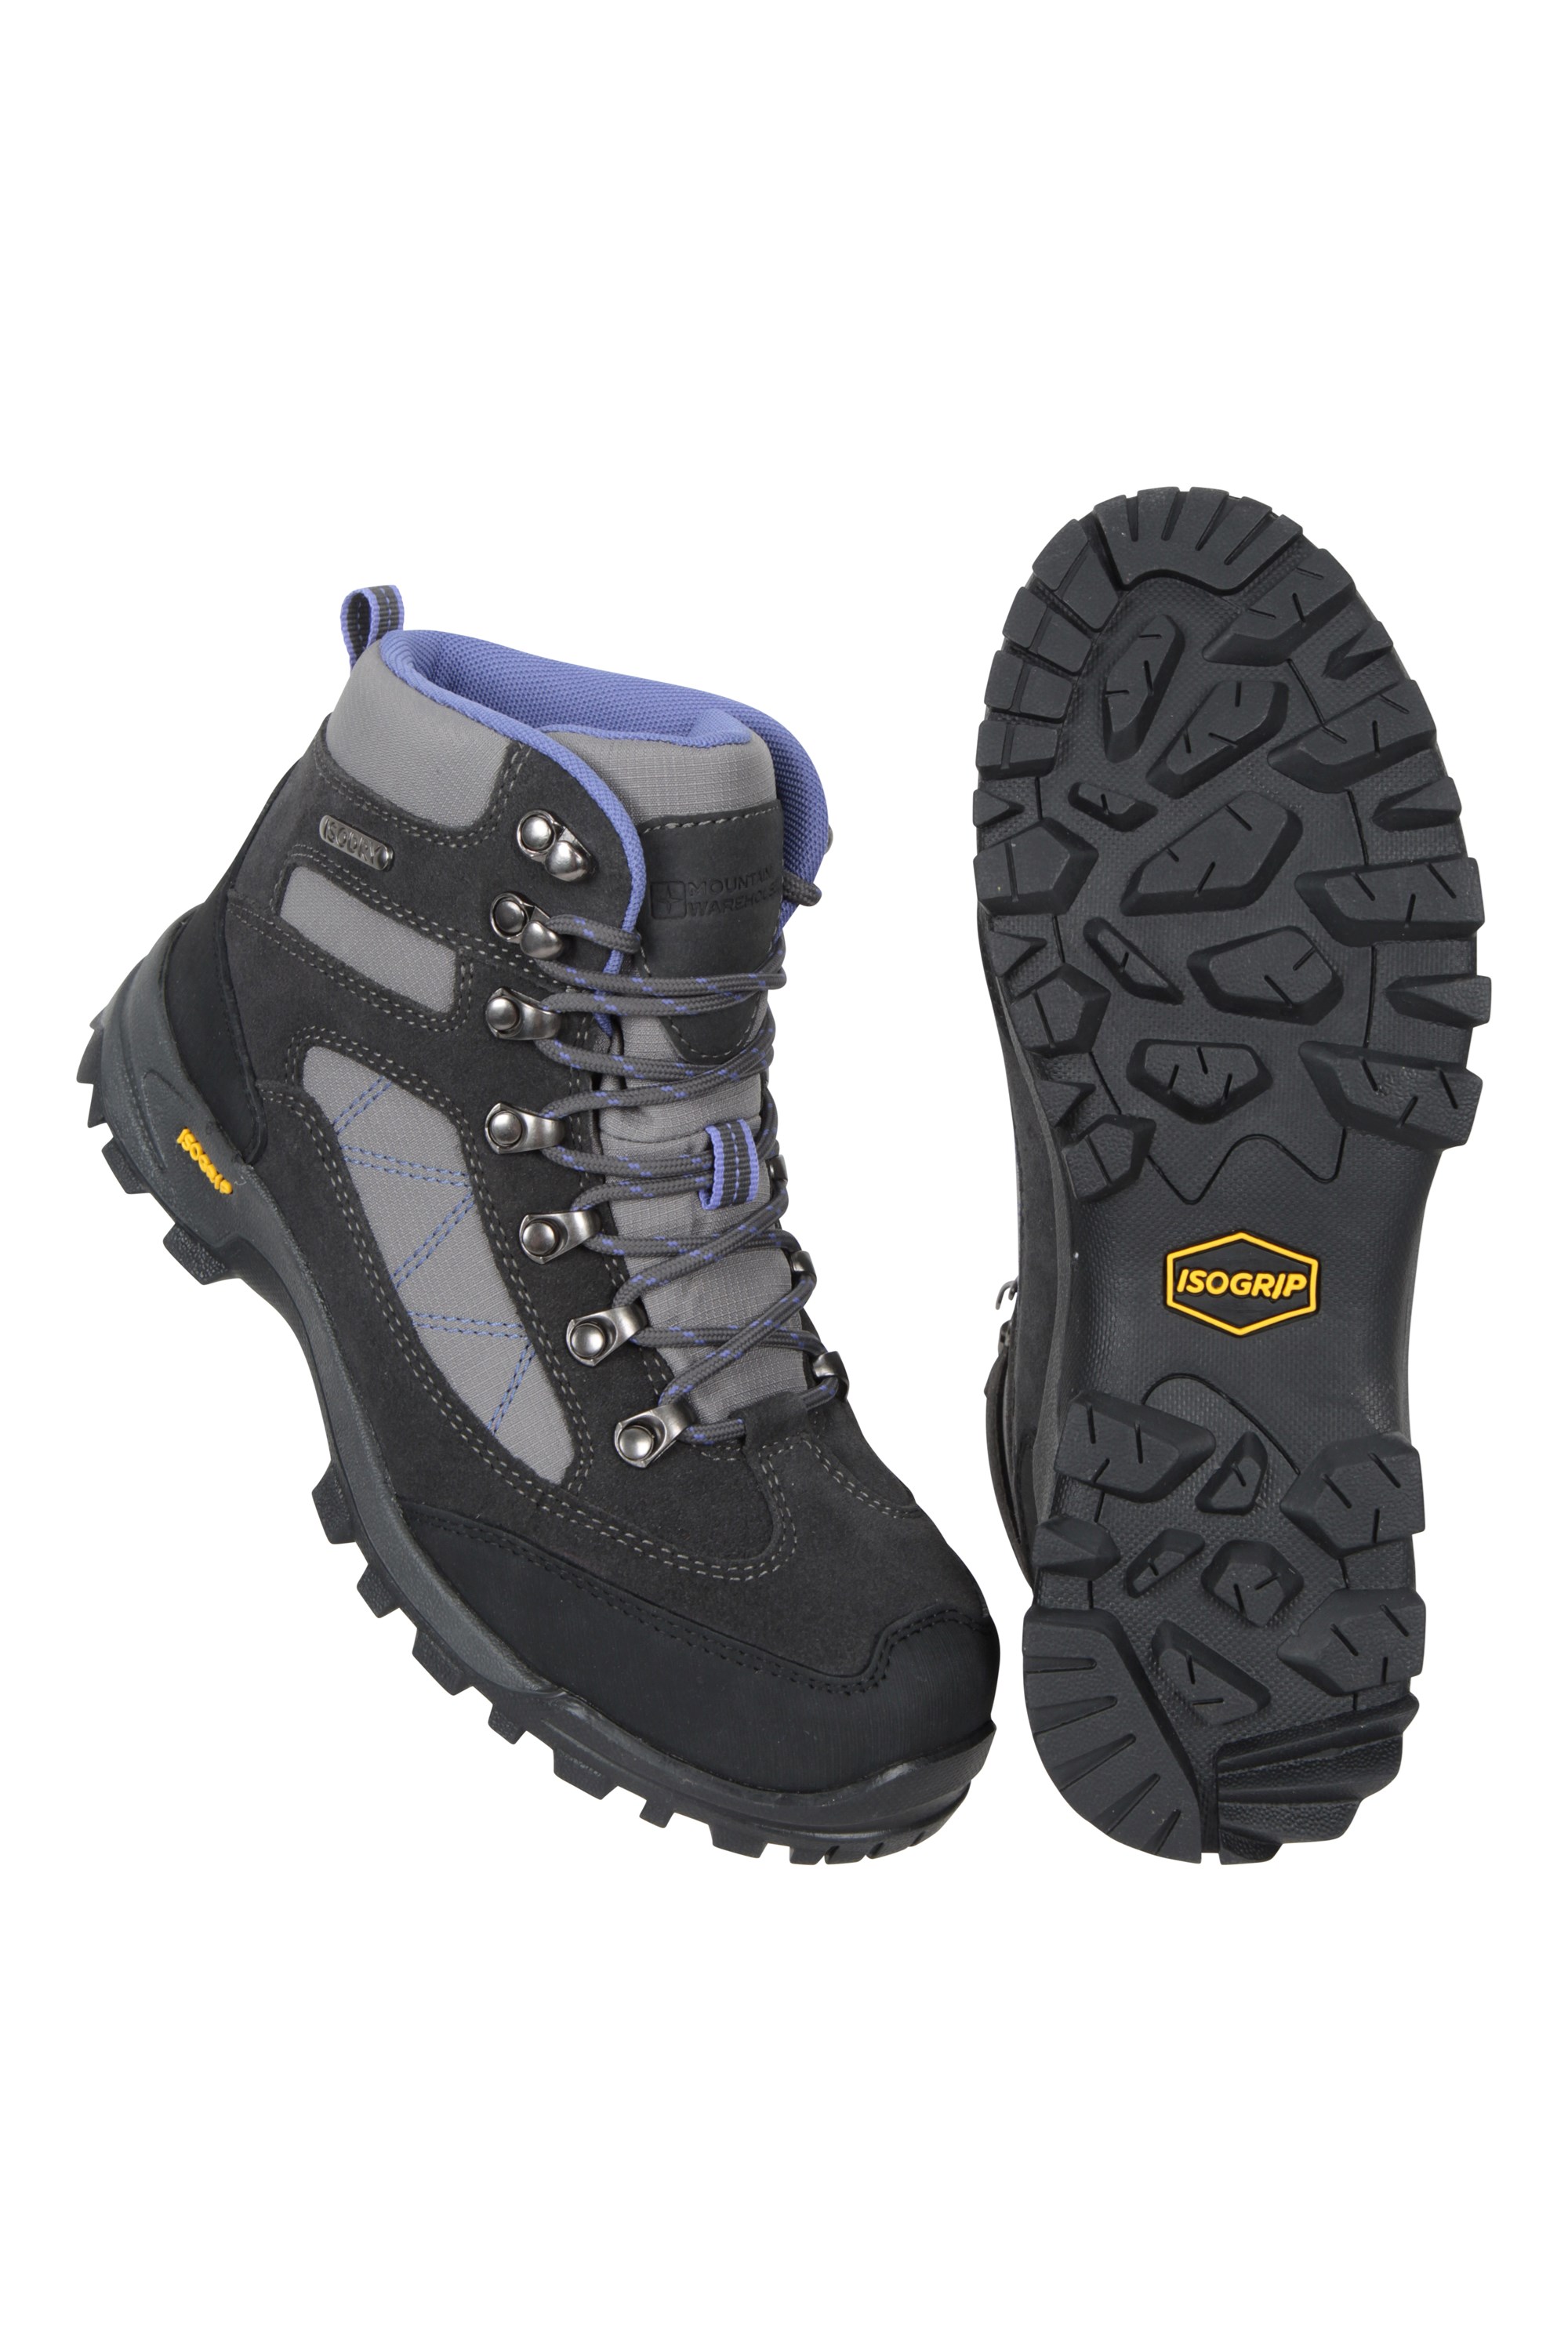 Extreme Storm Womens Waterproof Isogrip Boots - Grey